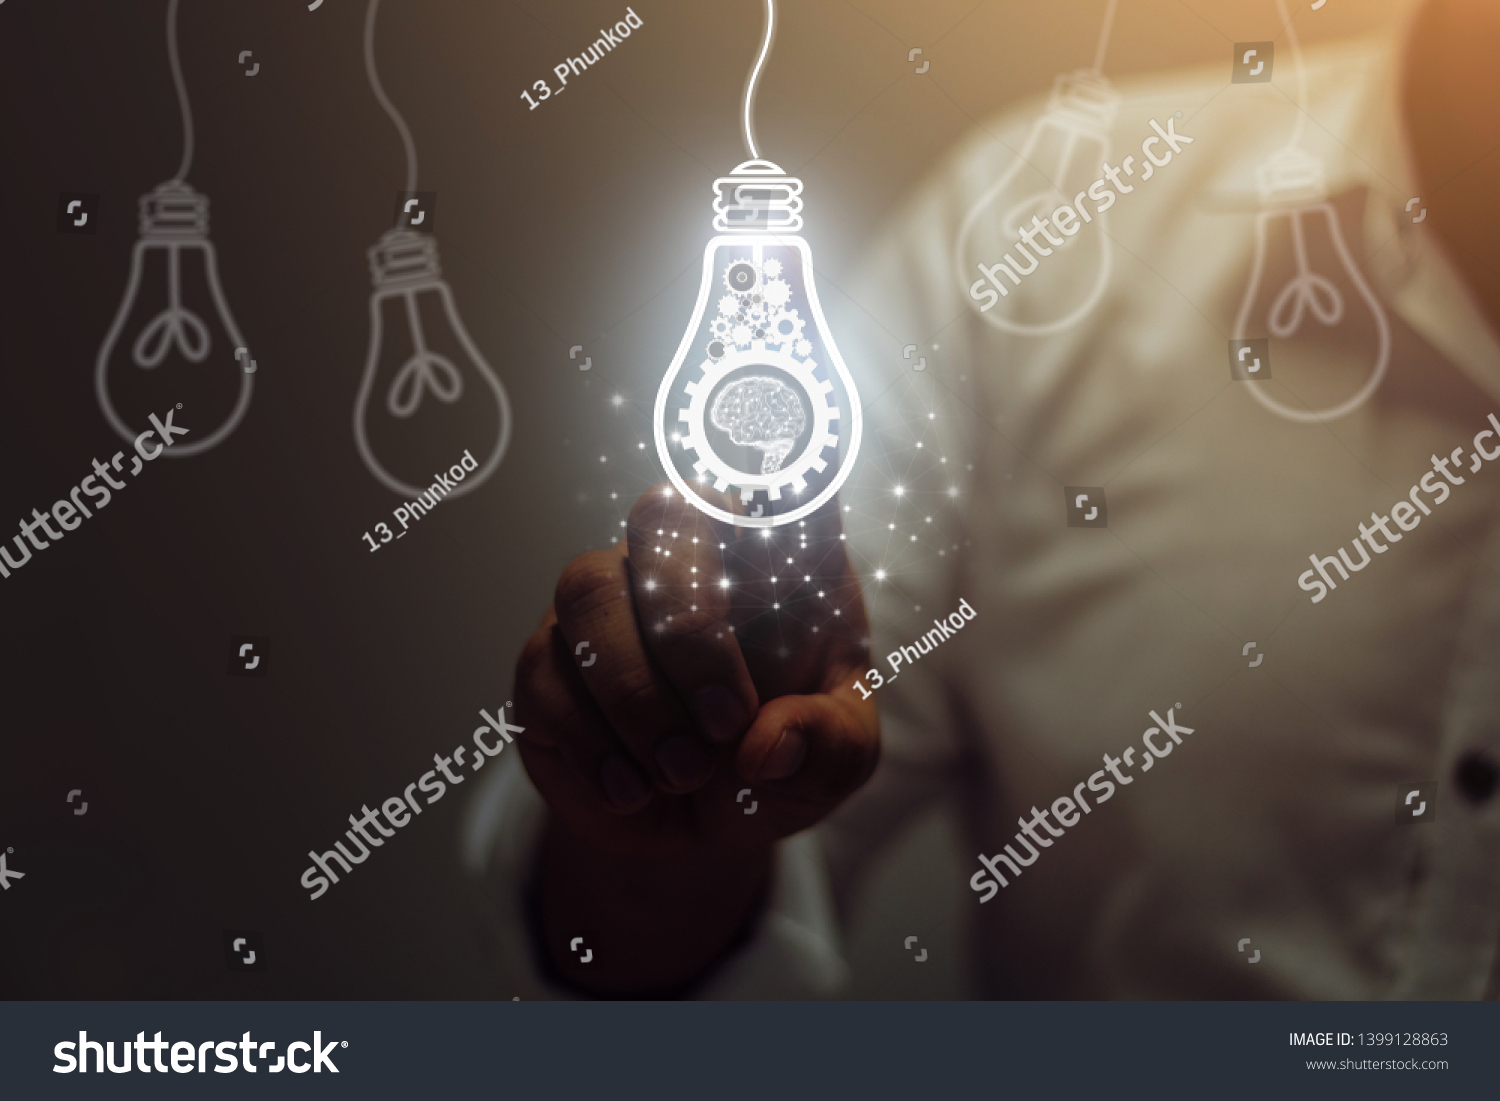 Businessman touching light bulbs. ideas of new ideas with innovative technology and creativity. #1399128863